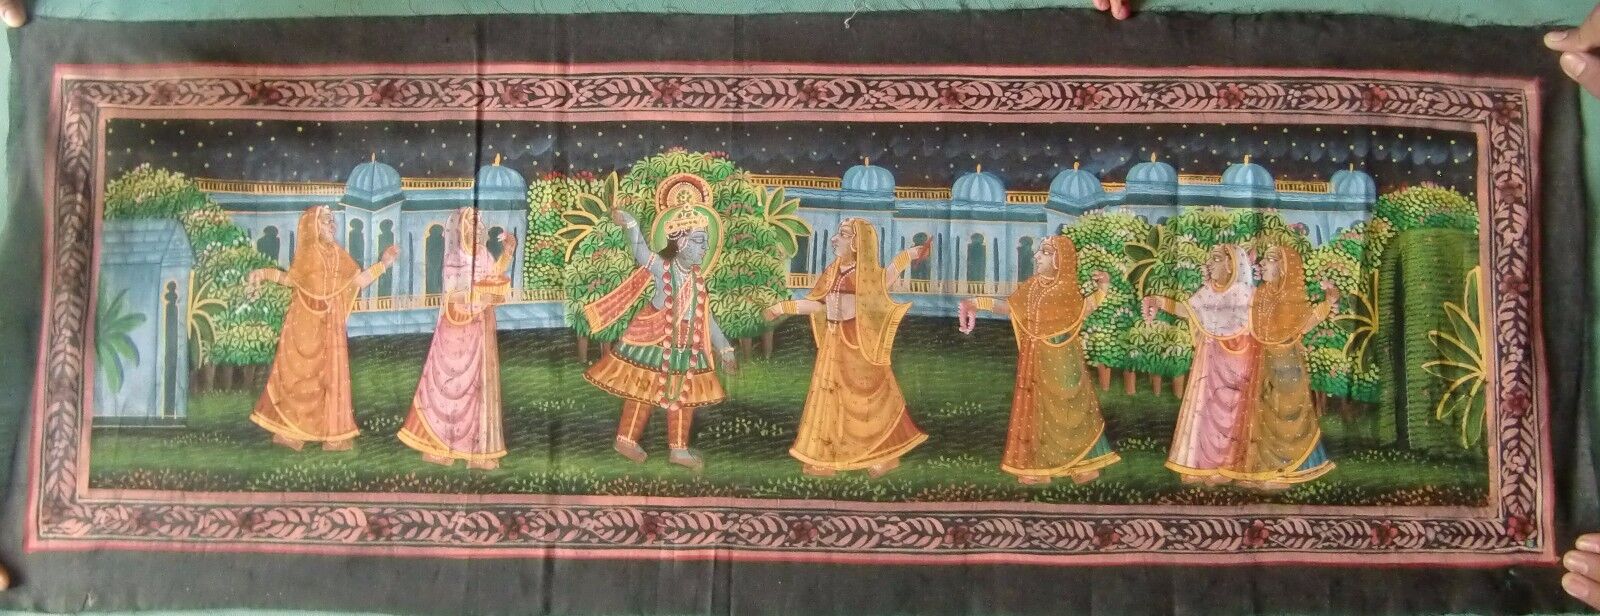 Very pretty wall hanging painting of hindu love god Krishna with gopis tapestry